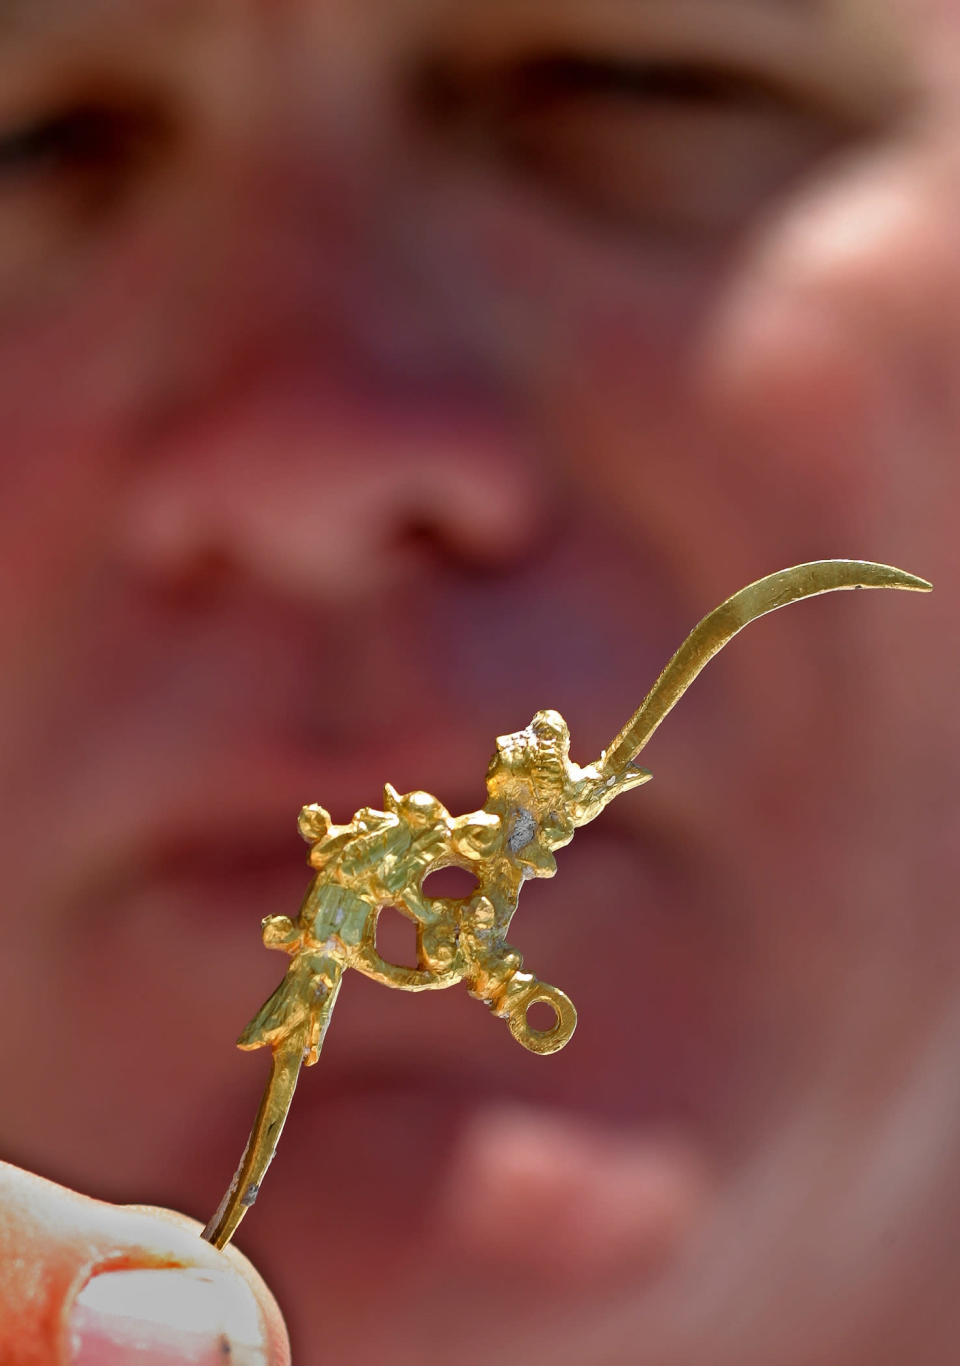 In this photo released by the Florida Keys News Bureau, Blue Water Ventures salvage company captain Dan Porter displays a tiny solid gold combination toothpick and earwax scoop Monday, May 19, 2008, in Key West, Fla. A diver on Porter's salvage boat recovered the artifact Sunday, May 18, about 40 miles west of Key West during a search for remains of the Spanish galleon Santa Margarita that shipwrecked in a 1622 hurricane. According to archaeologists, the 3-inch-long, 17th century grooming tool is more than 385 years old and was probably worn on a gold chain. Estimated value could exceed $100,000. (AP Photo/Florida Keys News Bureau, Bob Care)